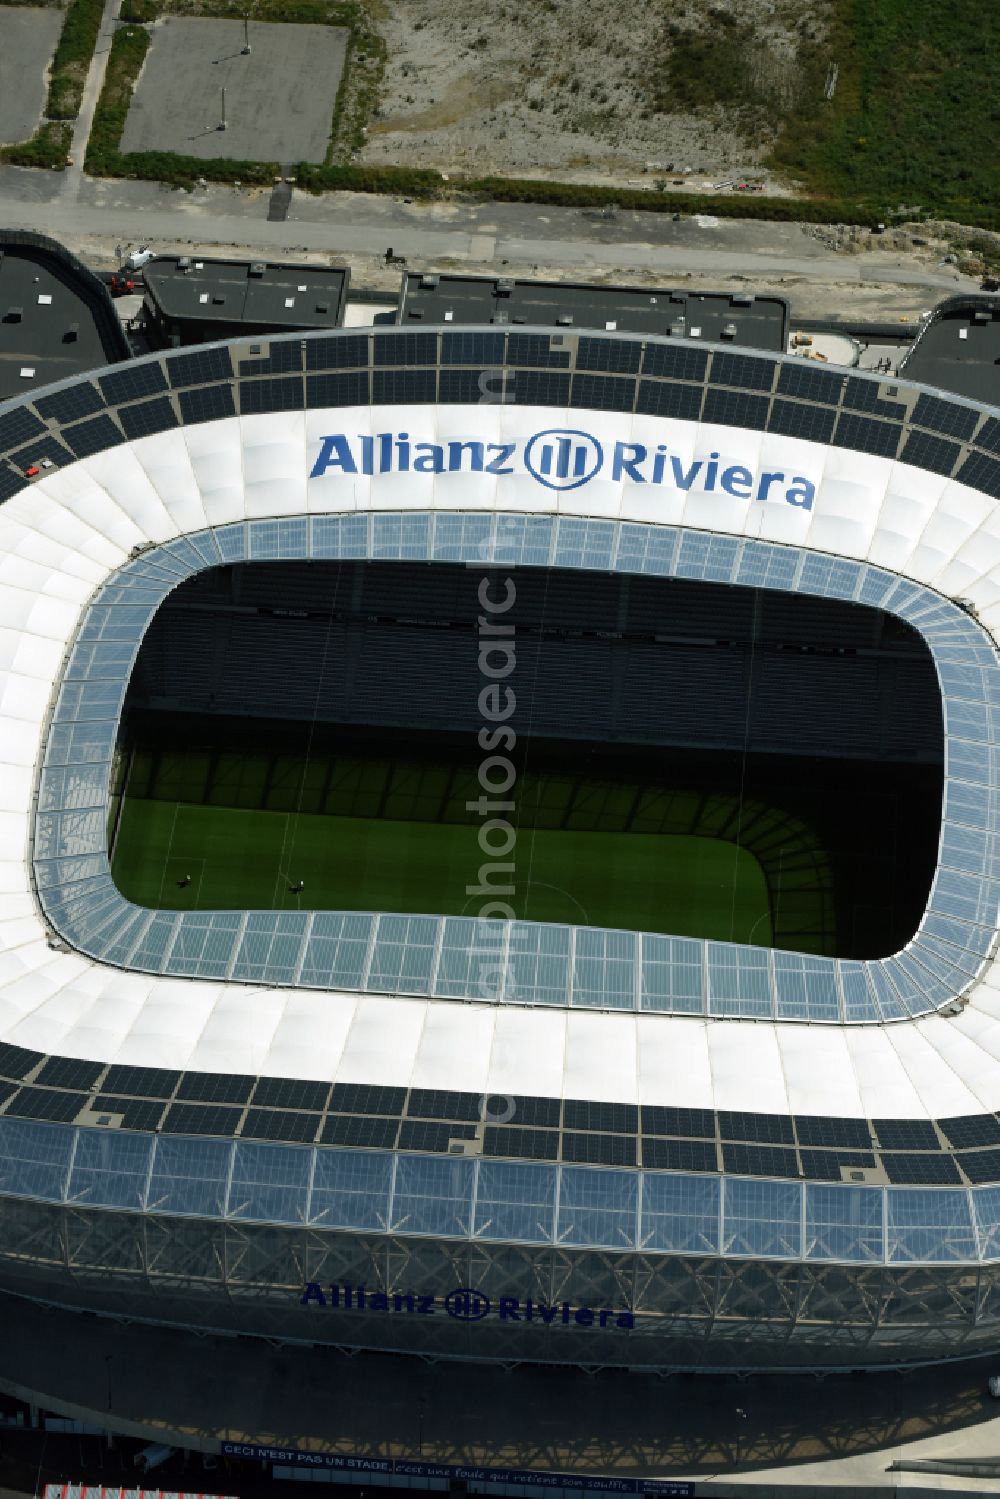 Aerial photograph Nizza - Sports facility grounds of the Arena stadium Allianz Riviera Bd. des Jardiniers in Nice in Provence-Alpes-Cote d'Azur, France